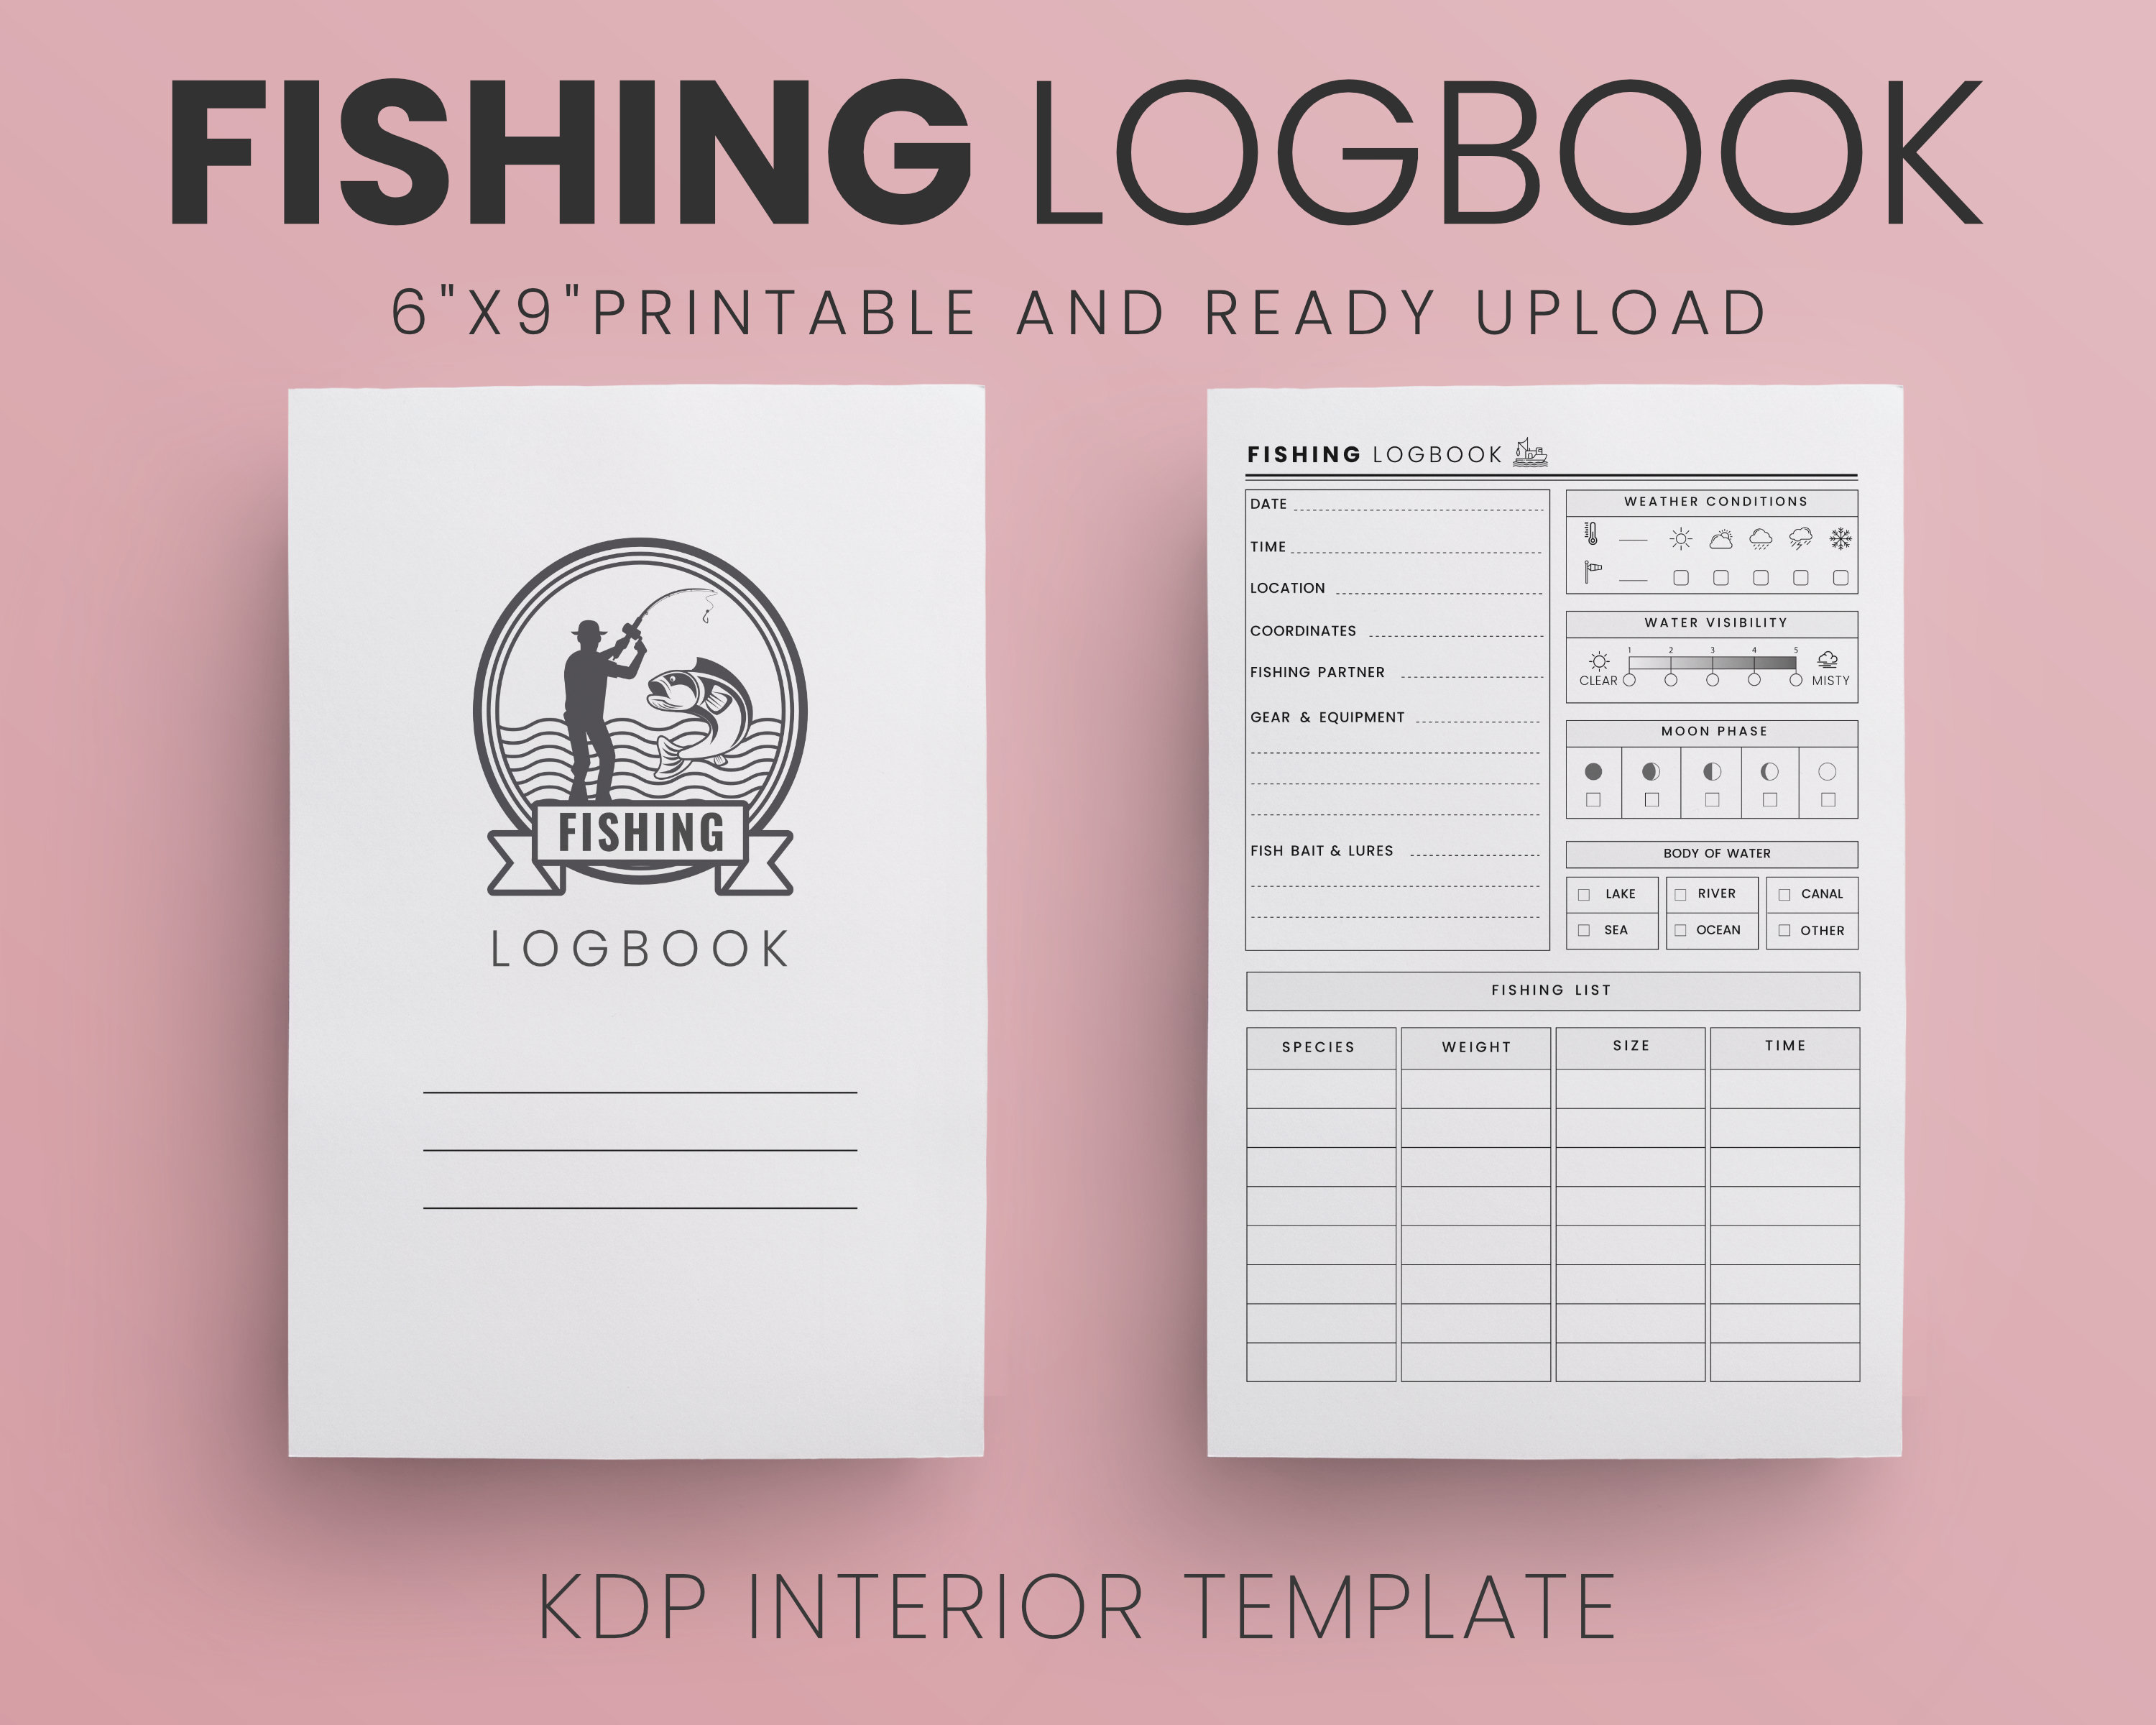 Fishing Logbook 6x9 Inches Ready to Upload PDF Commercial Use KDP Interiors  Template Low Content Book Fishing Log Book Interior -  Canada